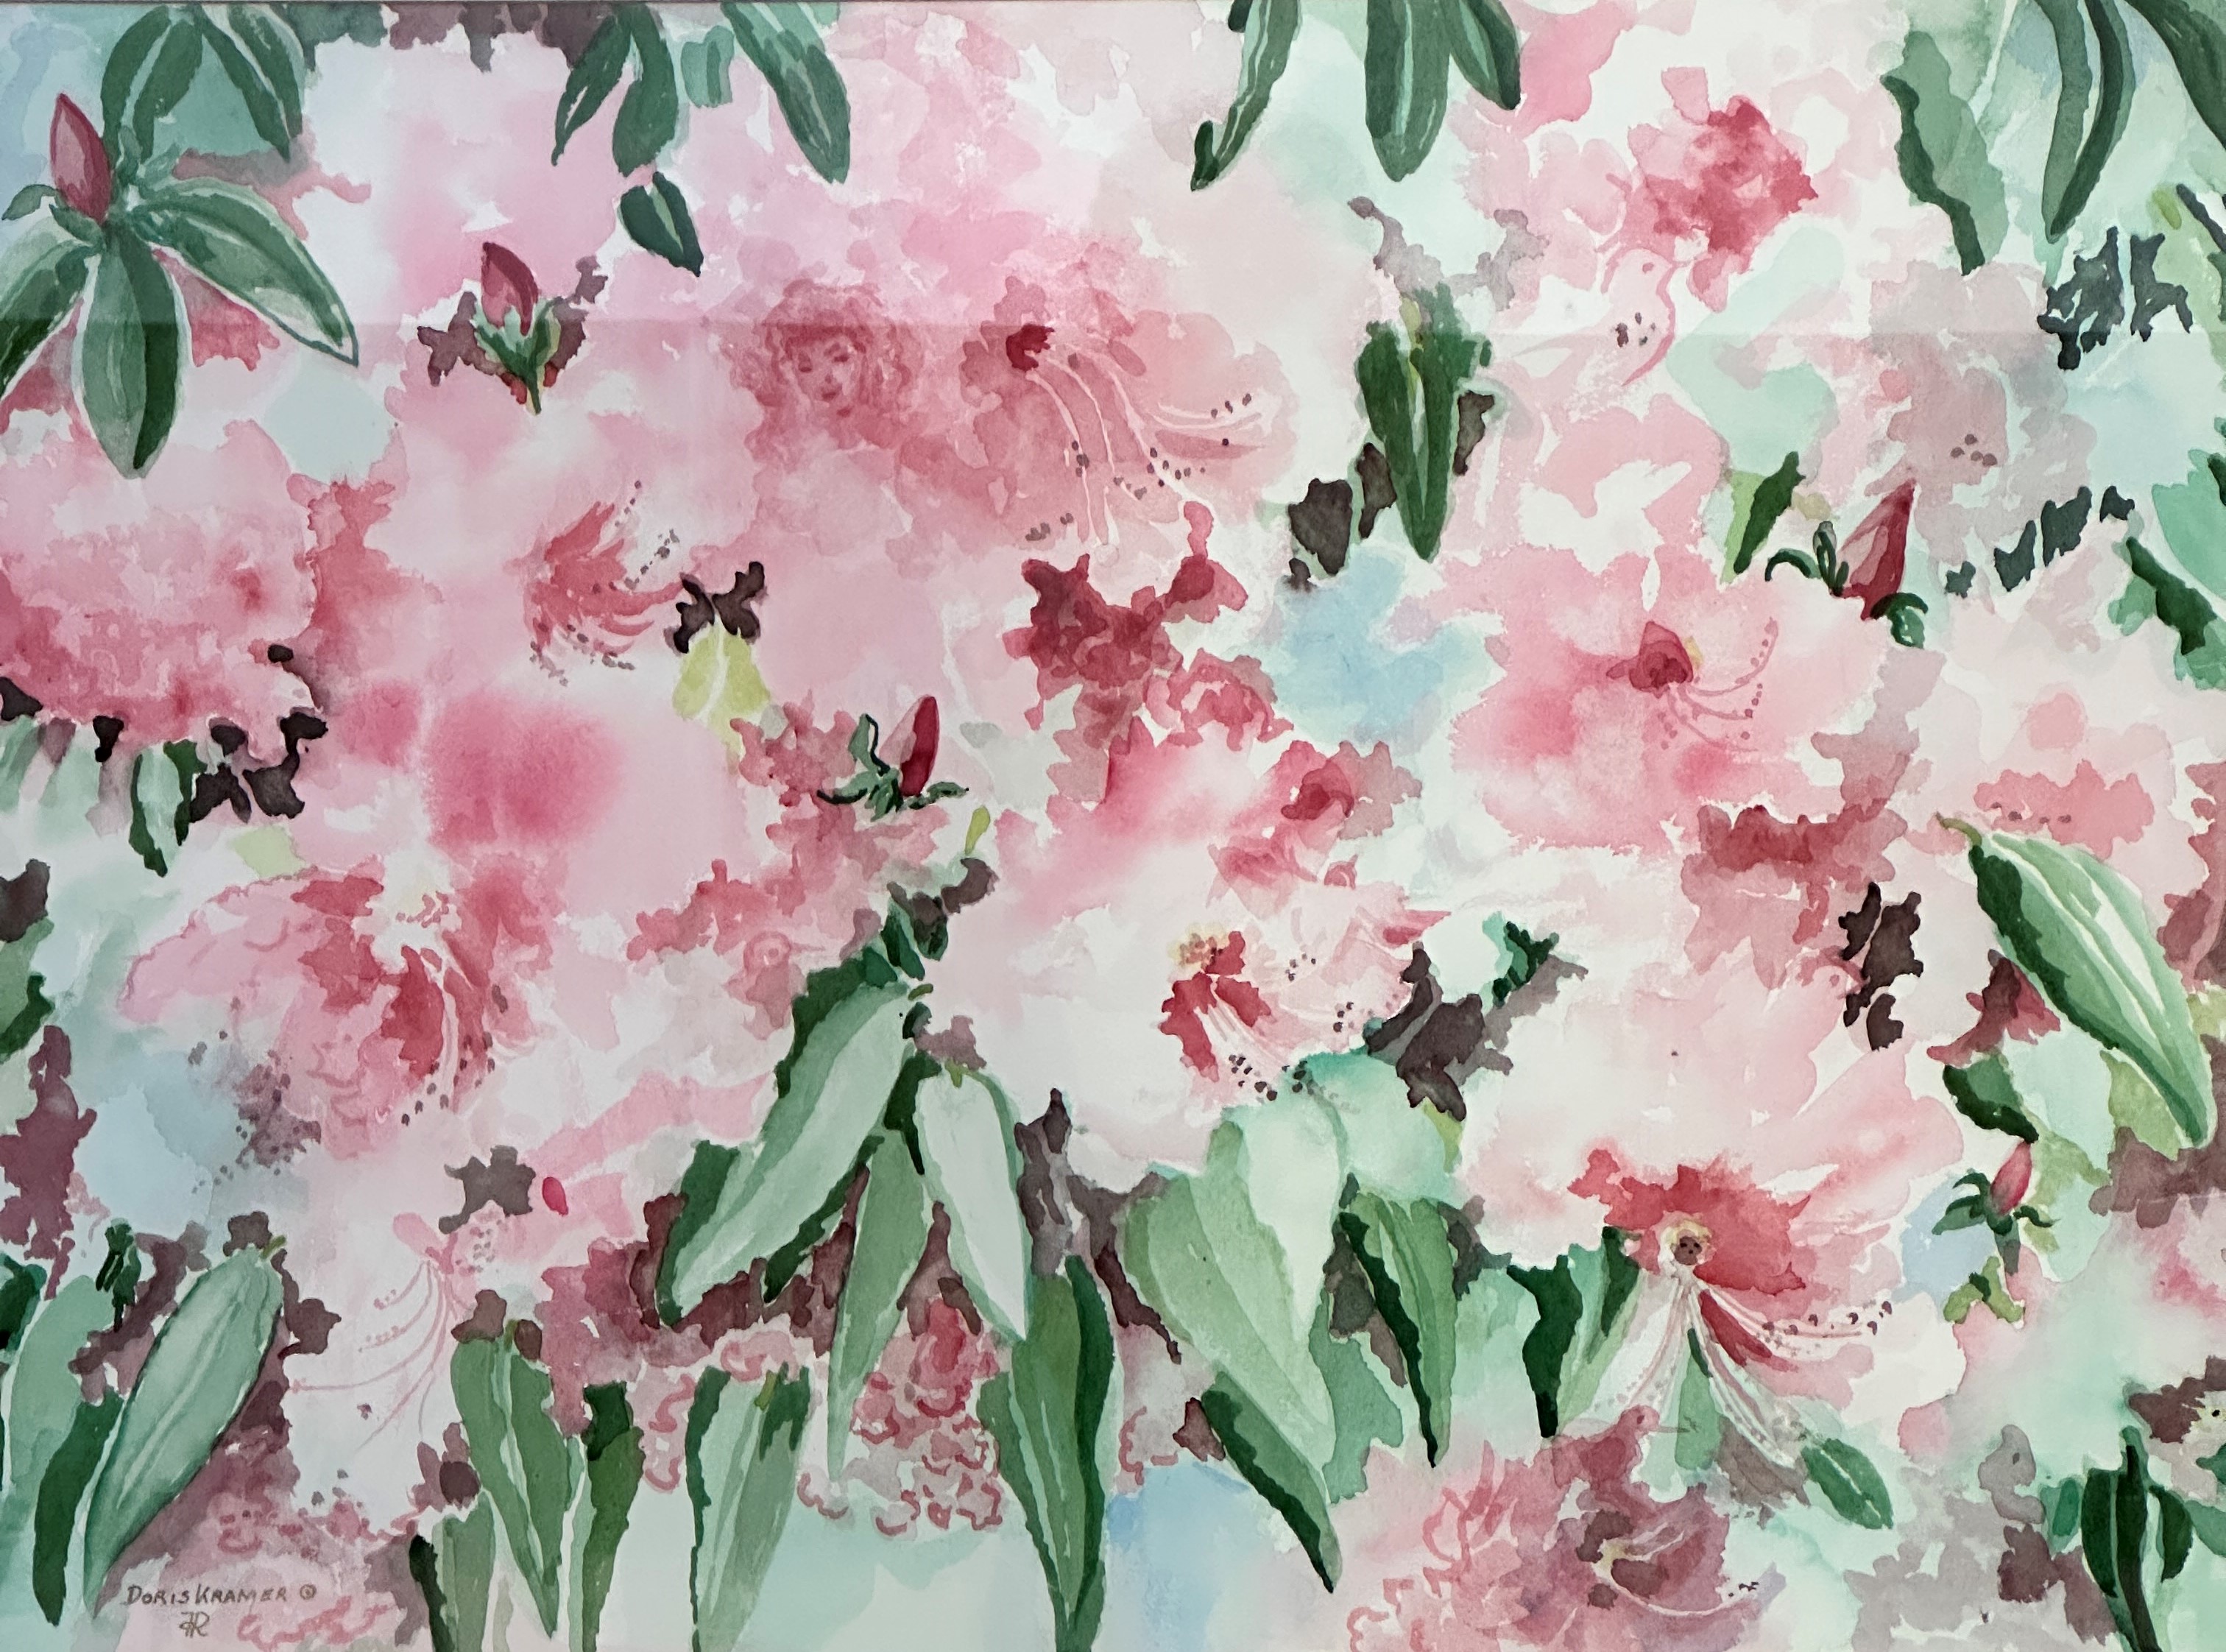 Doris Kramer, (Canadian 1927 - 2009) Rhododendrons in Flower, watercolour, signed bottom left and